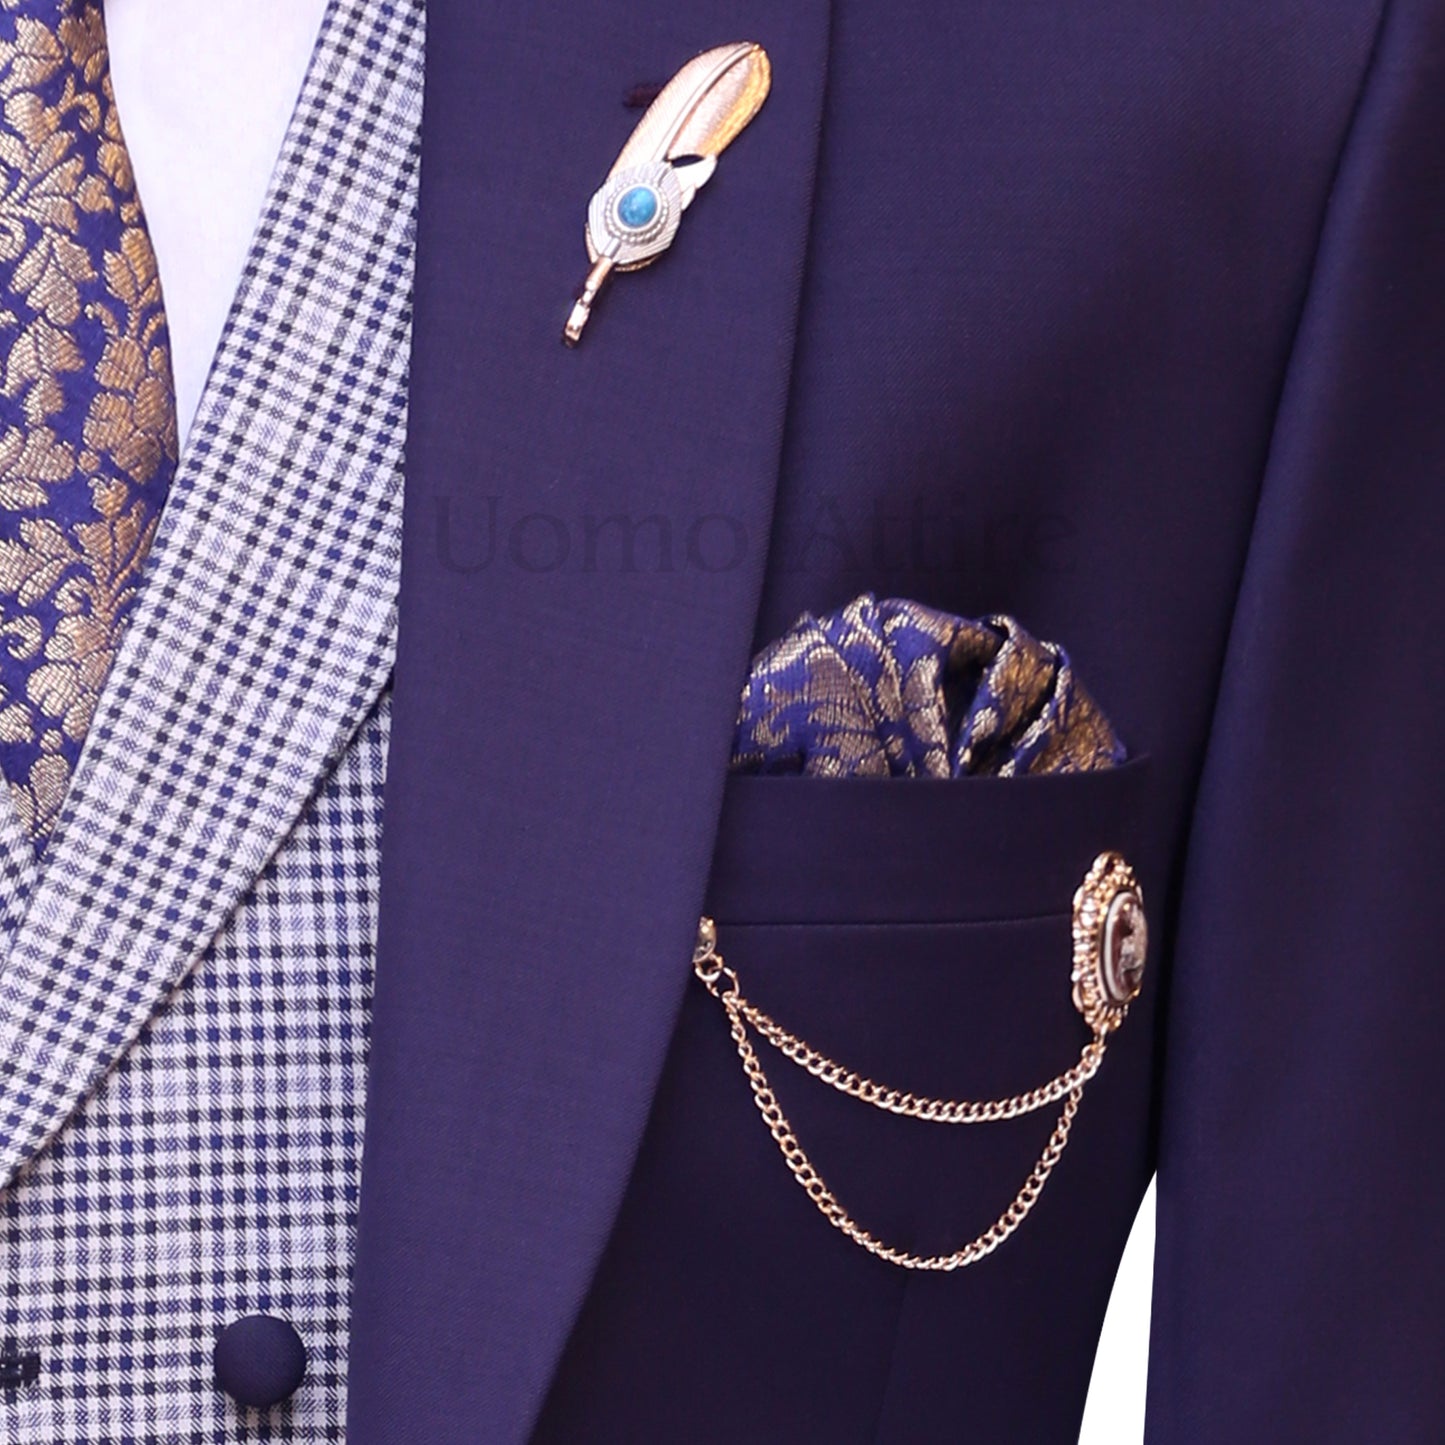 
                  
                    Bespoke plum three piece suit in pure italian fabric, plum color 3 piece suit with pocket square, lapel pin and chain brooch
                  
                